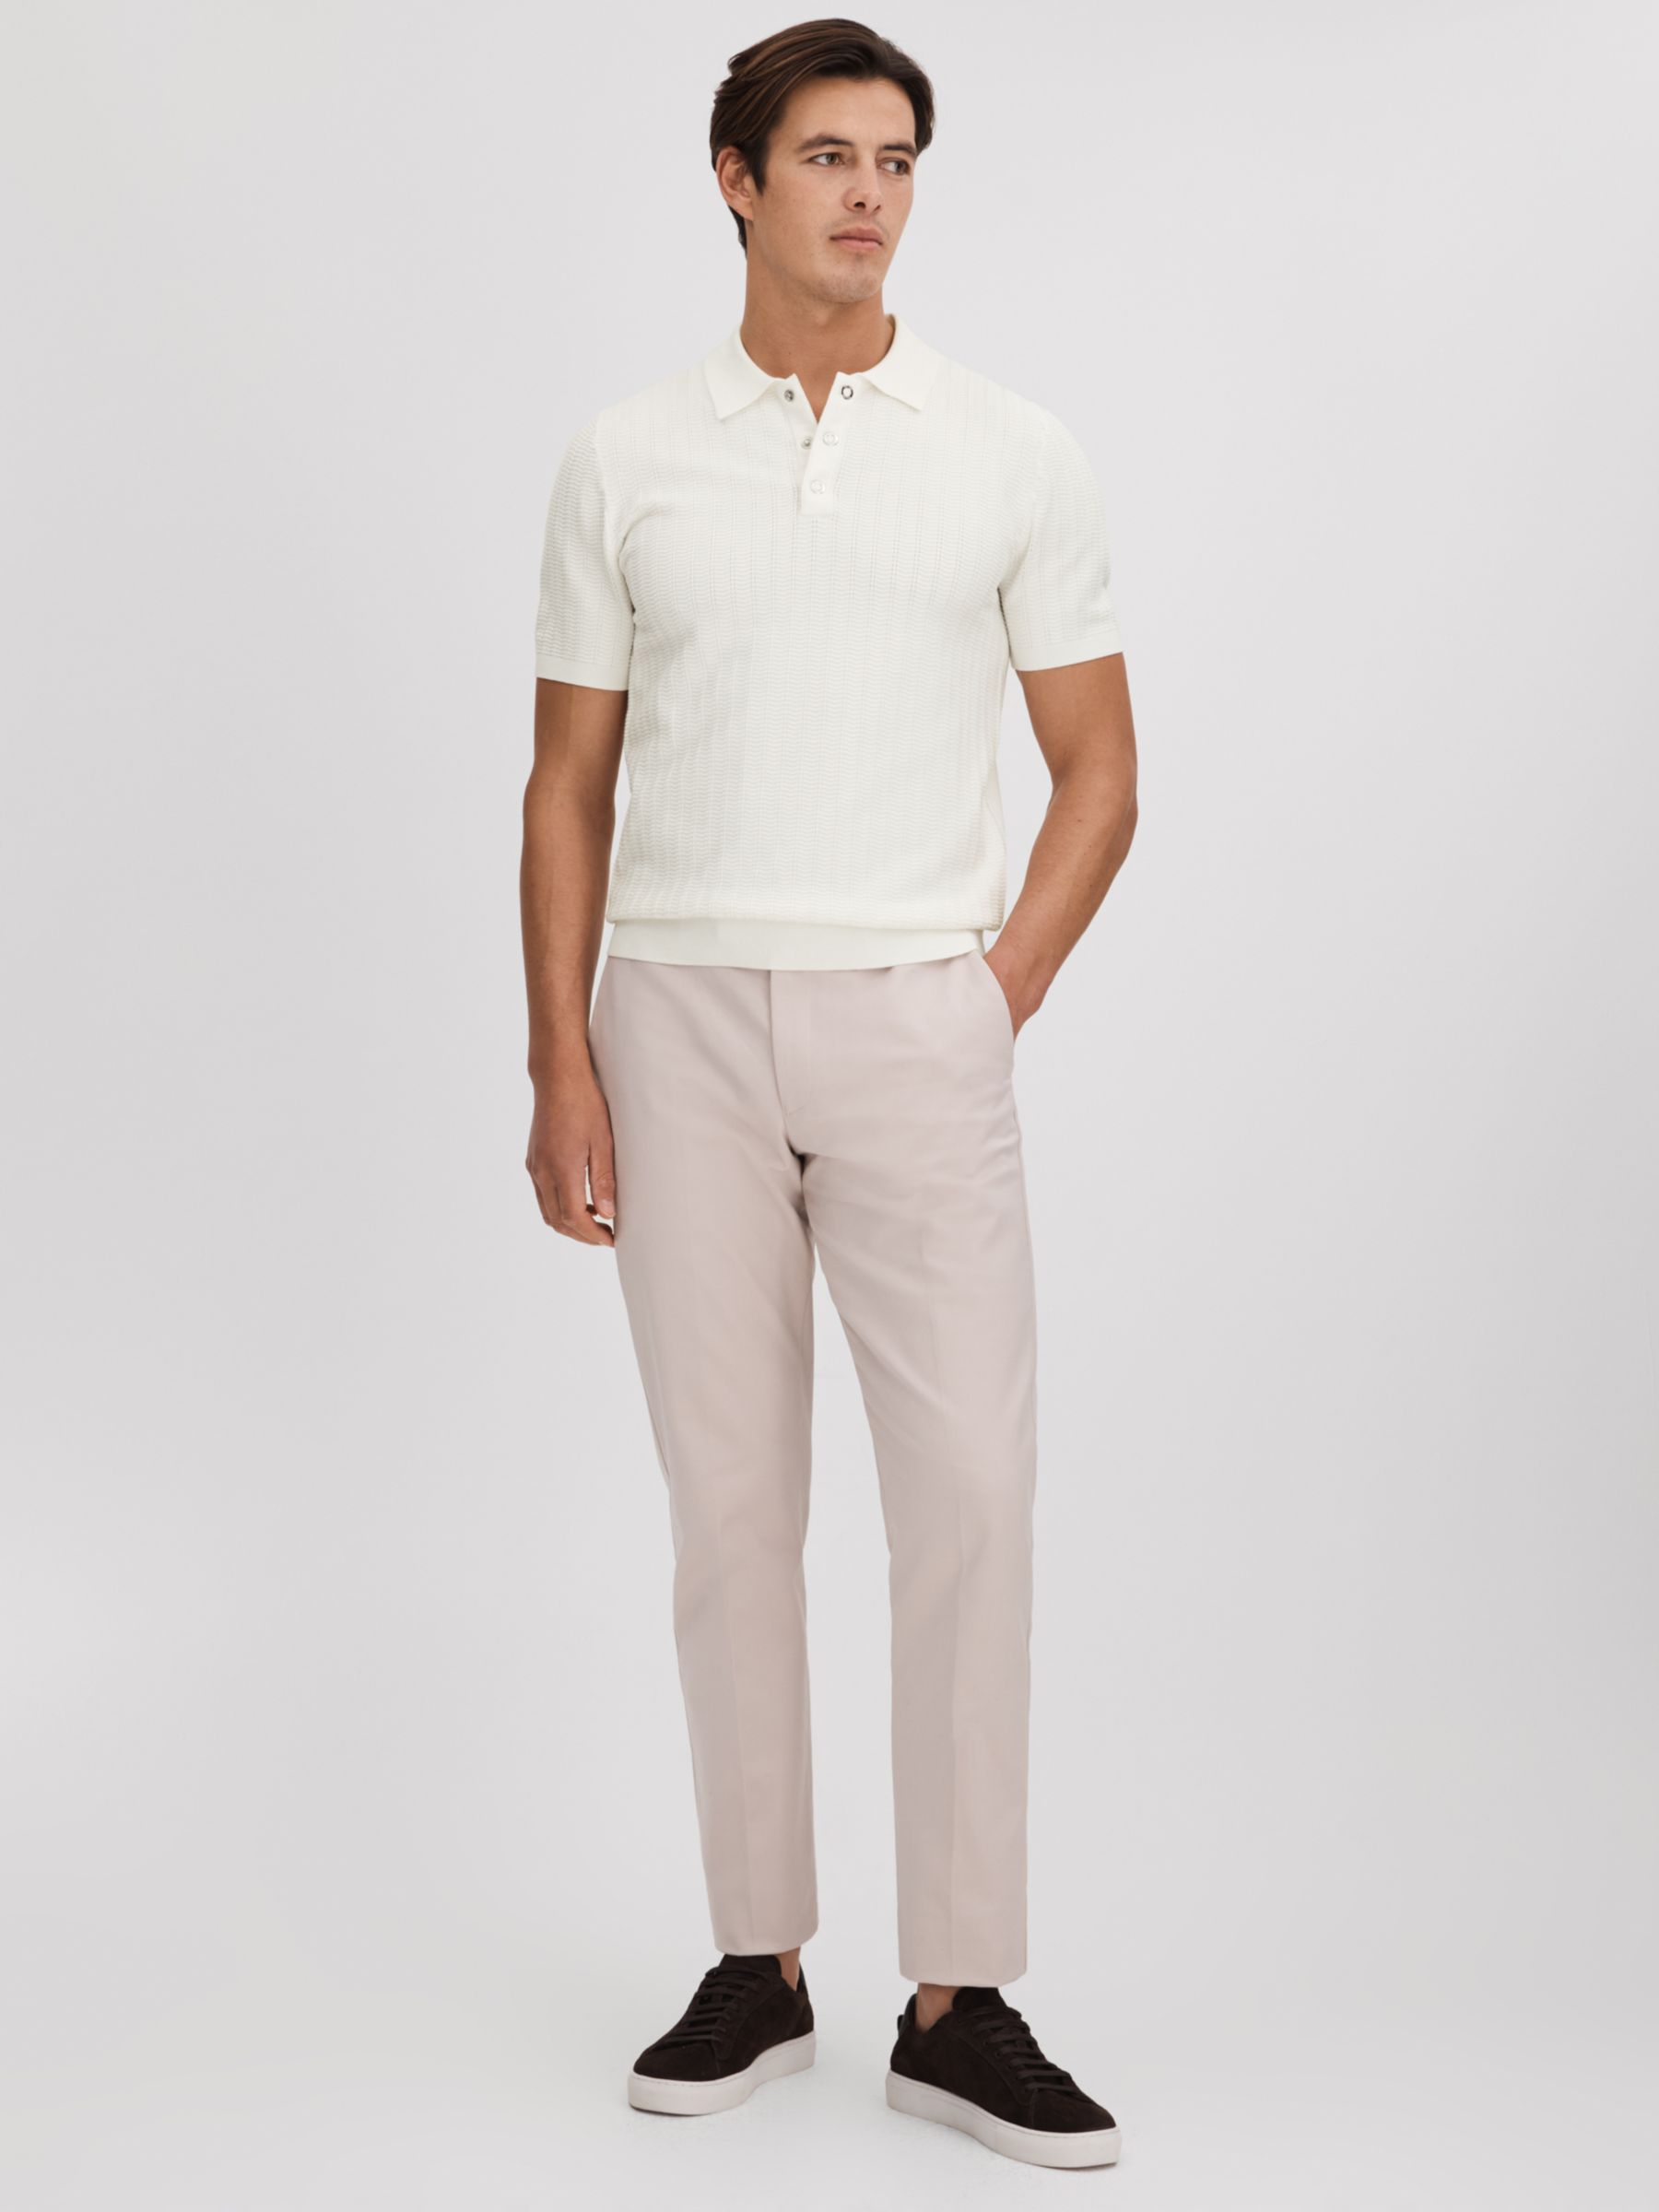 Reiss Pascoe Short Sleeve Polo Top, White at John Lewis & Partners